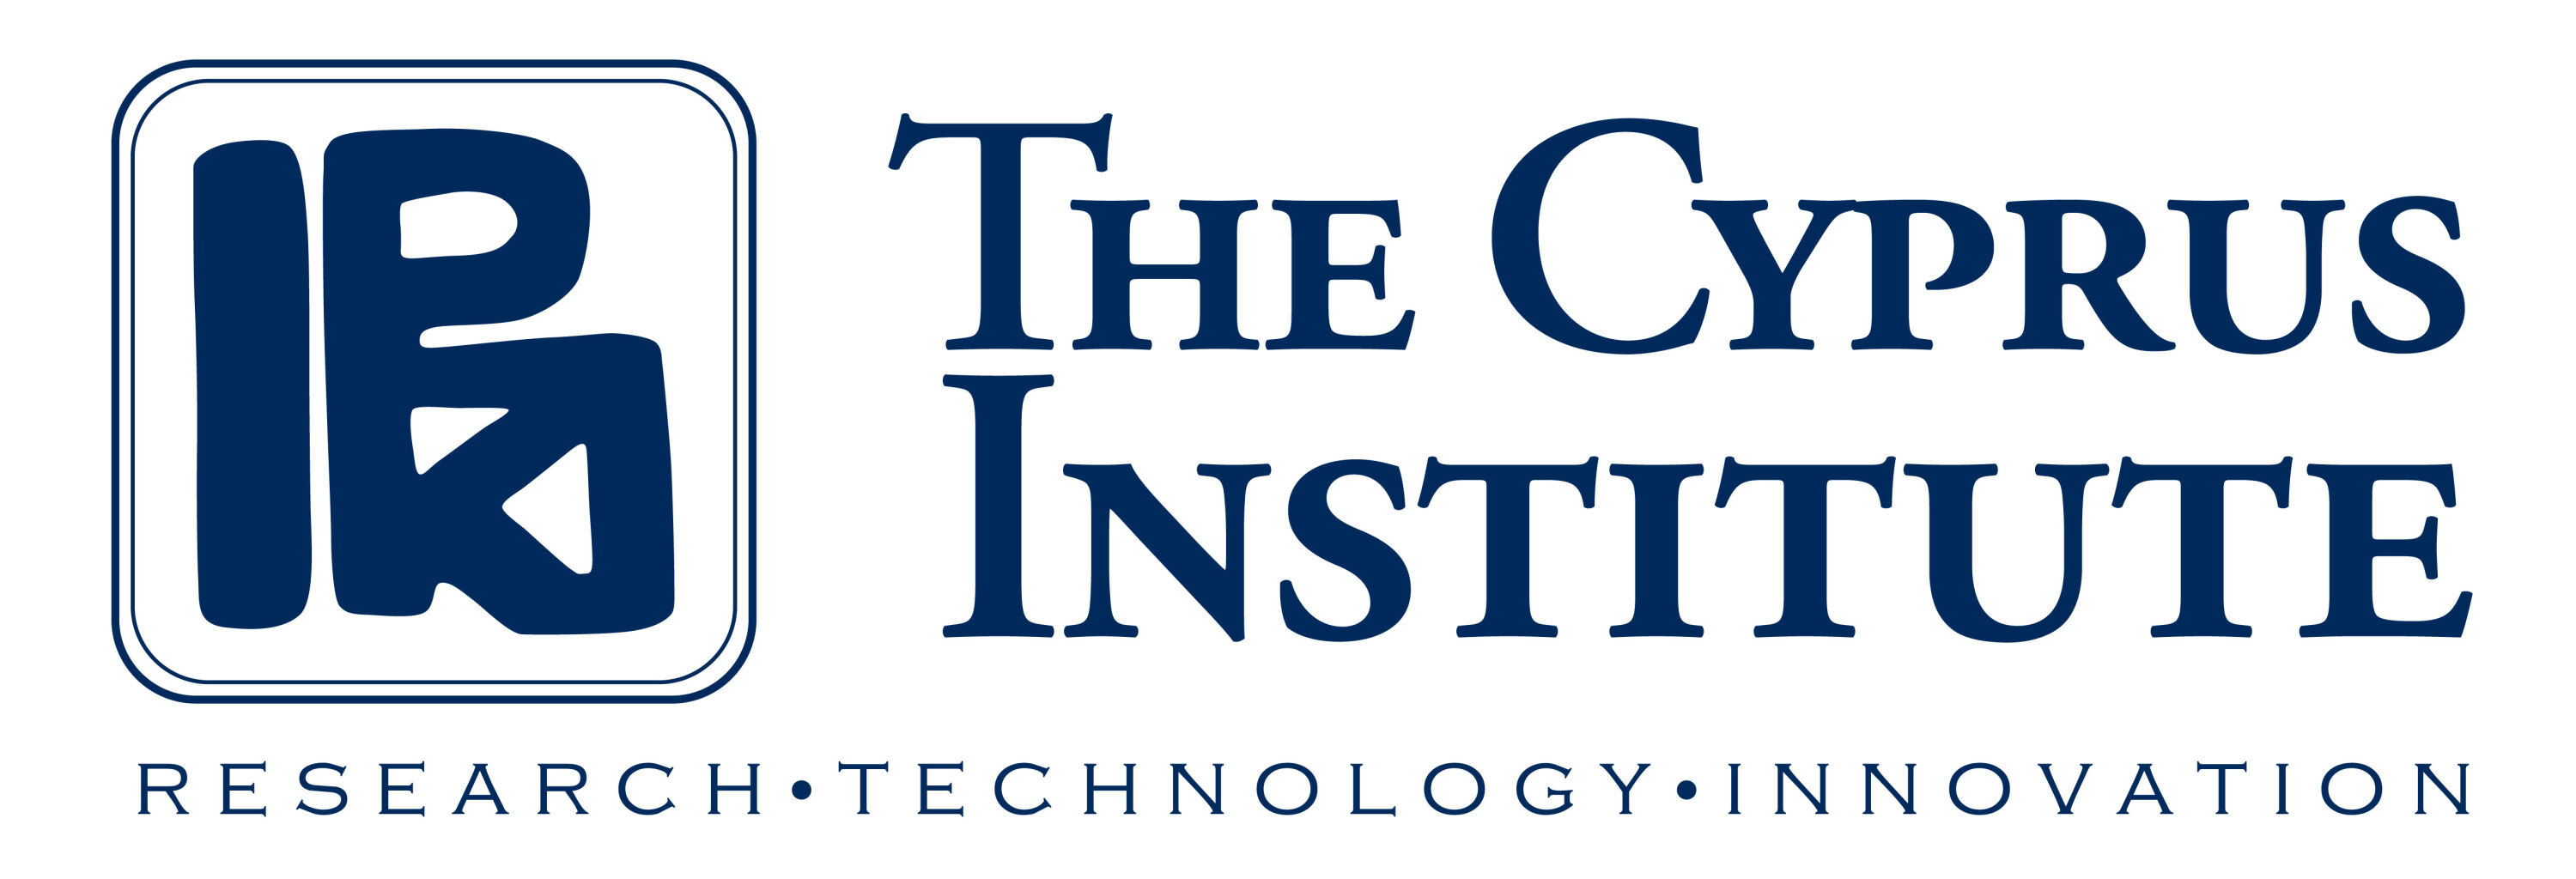 The Cyprus Institute, Climate and Atmosphere Research Center (CARE-C) Logo